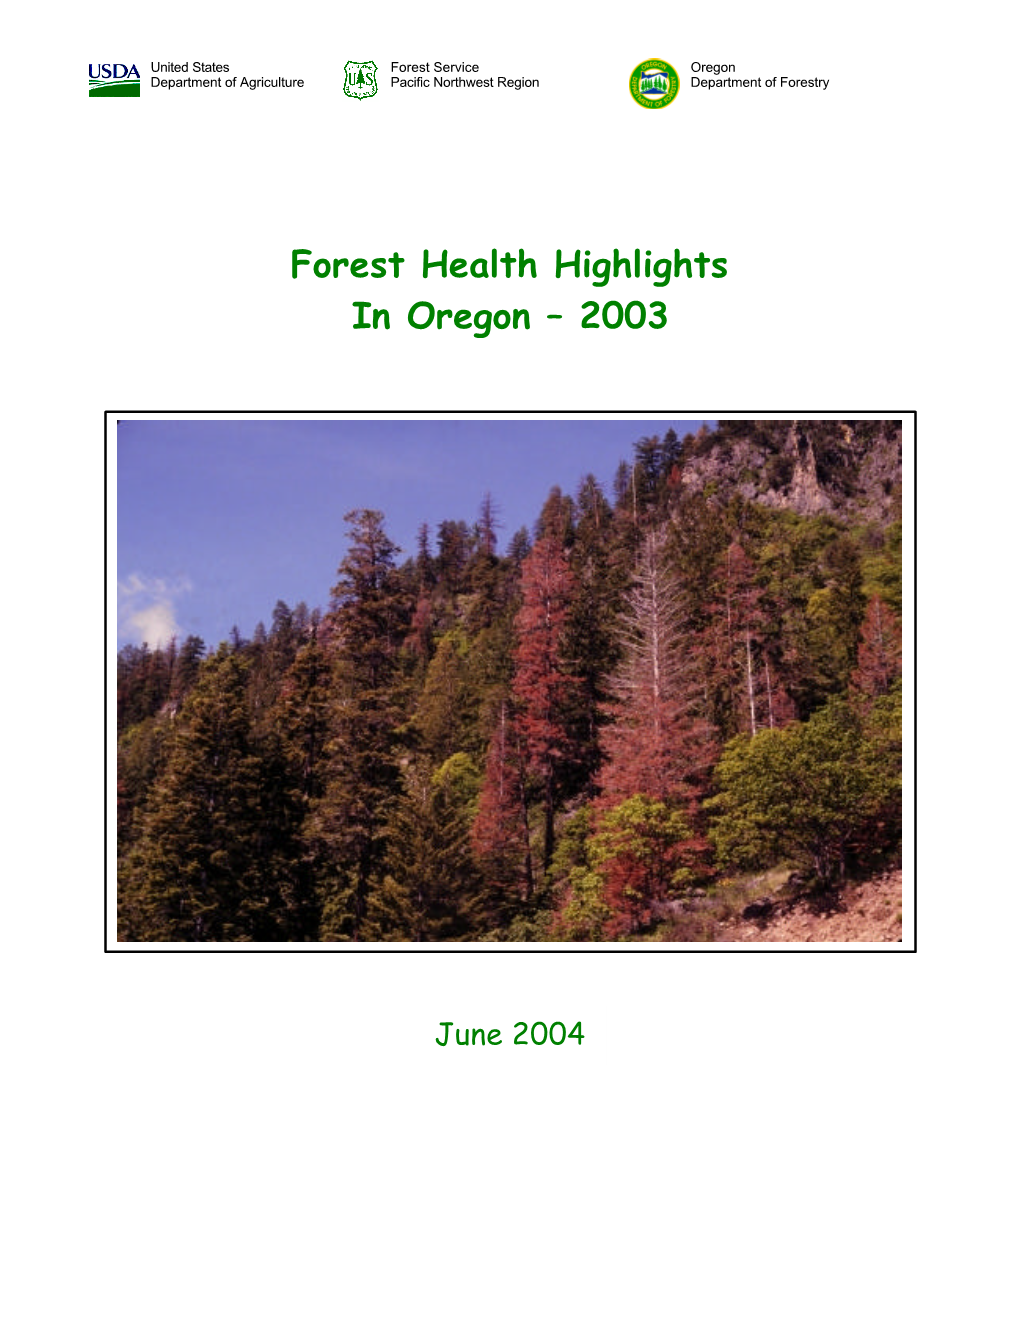 Forest Health Highlights in Oregon – 2003